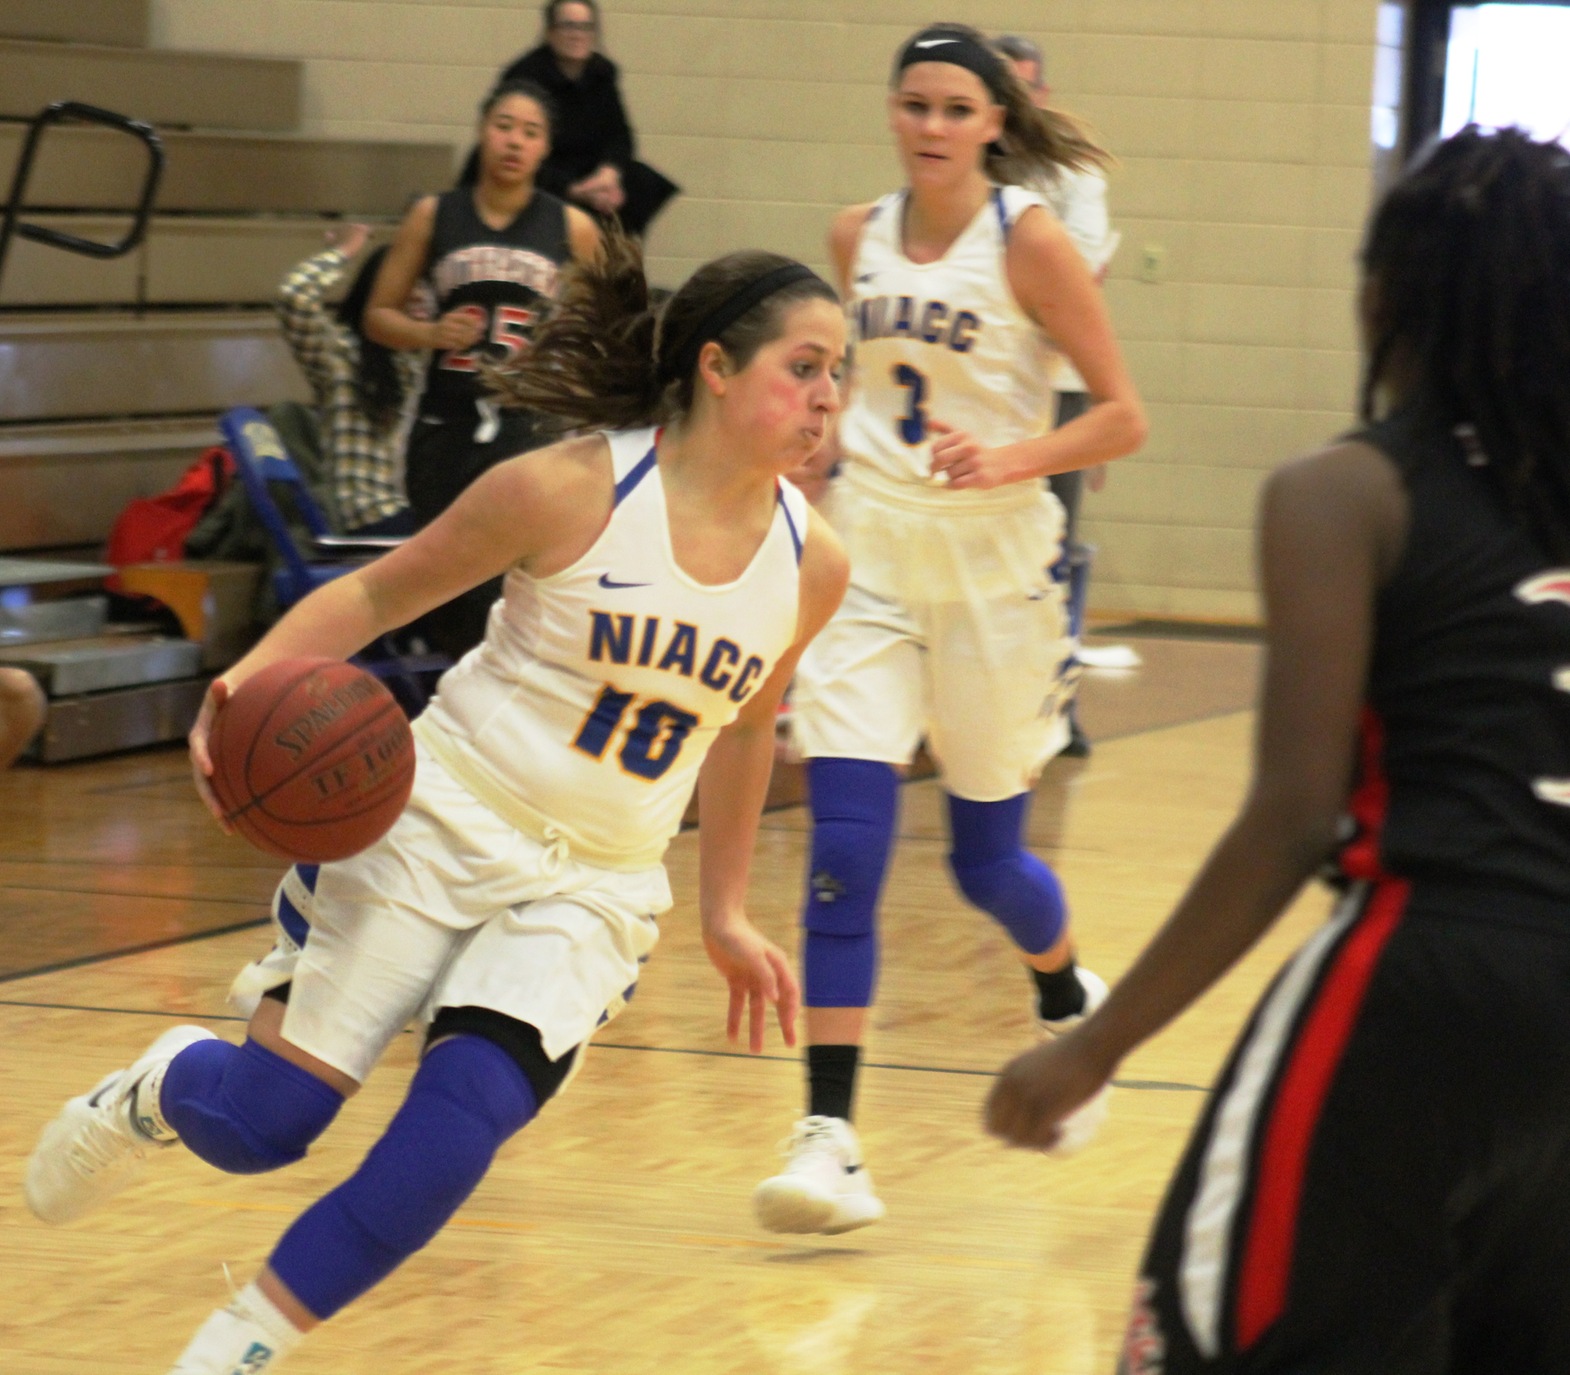 NIACC's Jordan Prantner moves the ball up the court in Saturday's win over Southeastern.